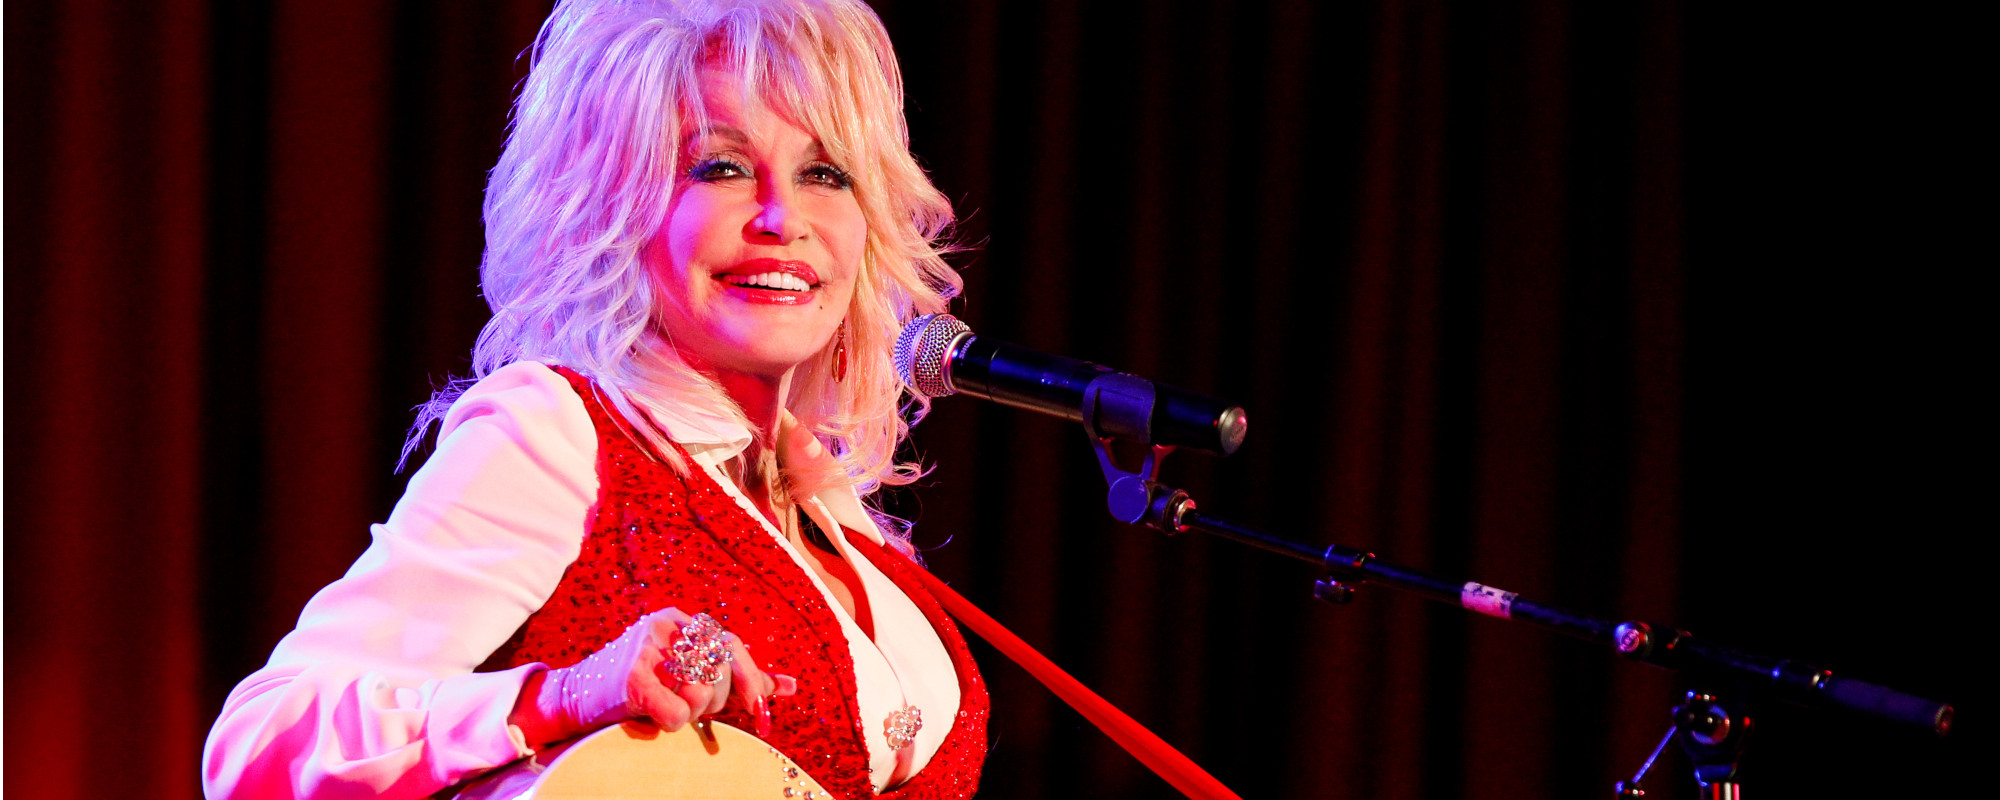 Dolly Parton Debuts New Version of “Puppy Love” for Gleeful Pet Gala Performance